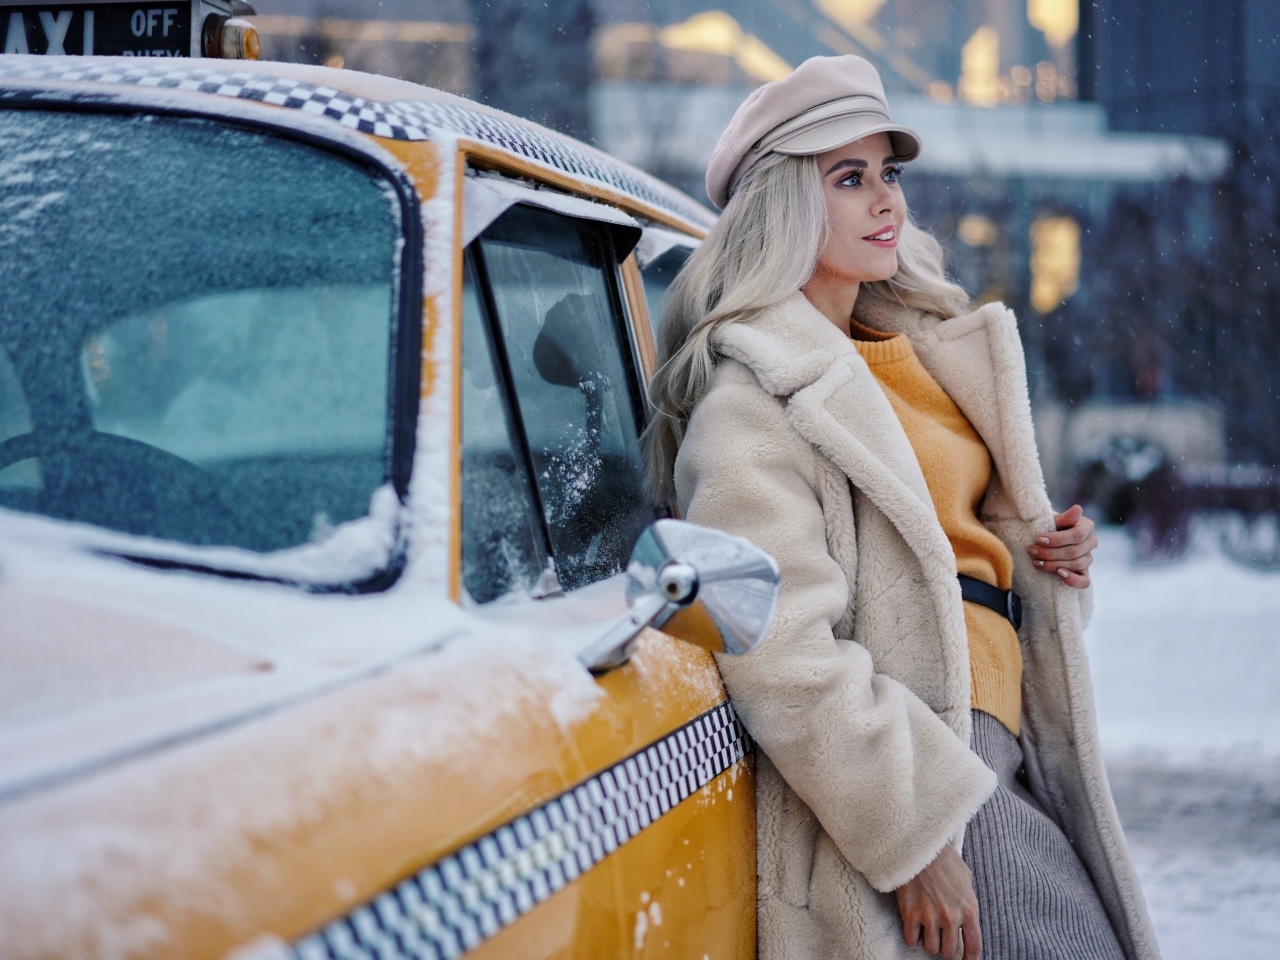 Winter Girl and Taxi wallpaper 1280x960